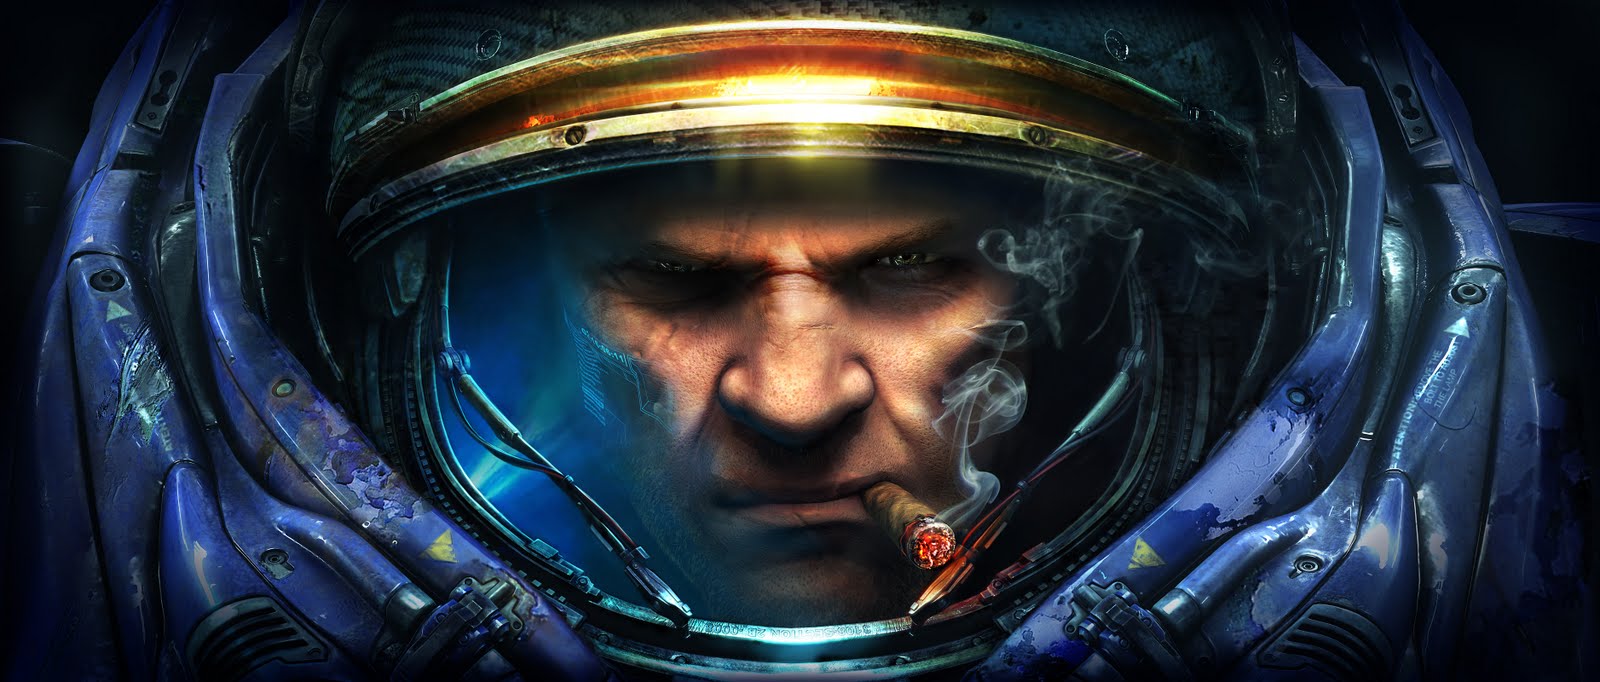 Image for StarCraft 2 - Nova Covert Ops mission packs coming in 2016